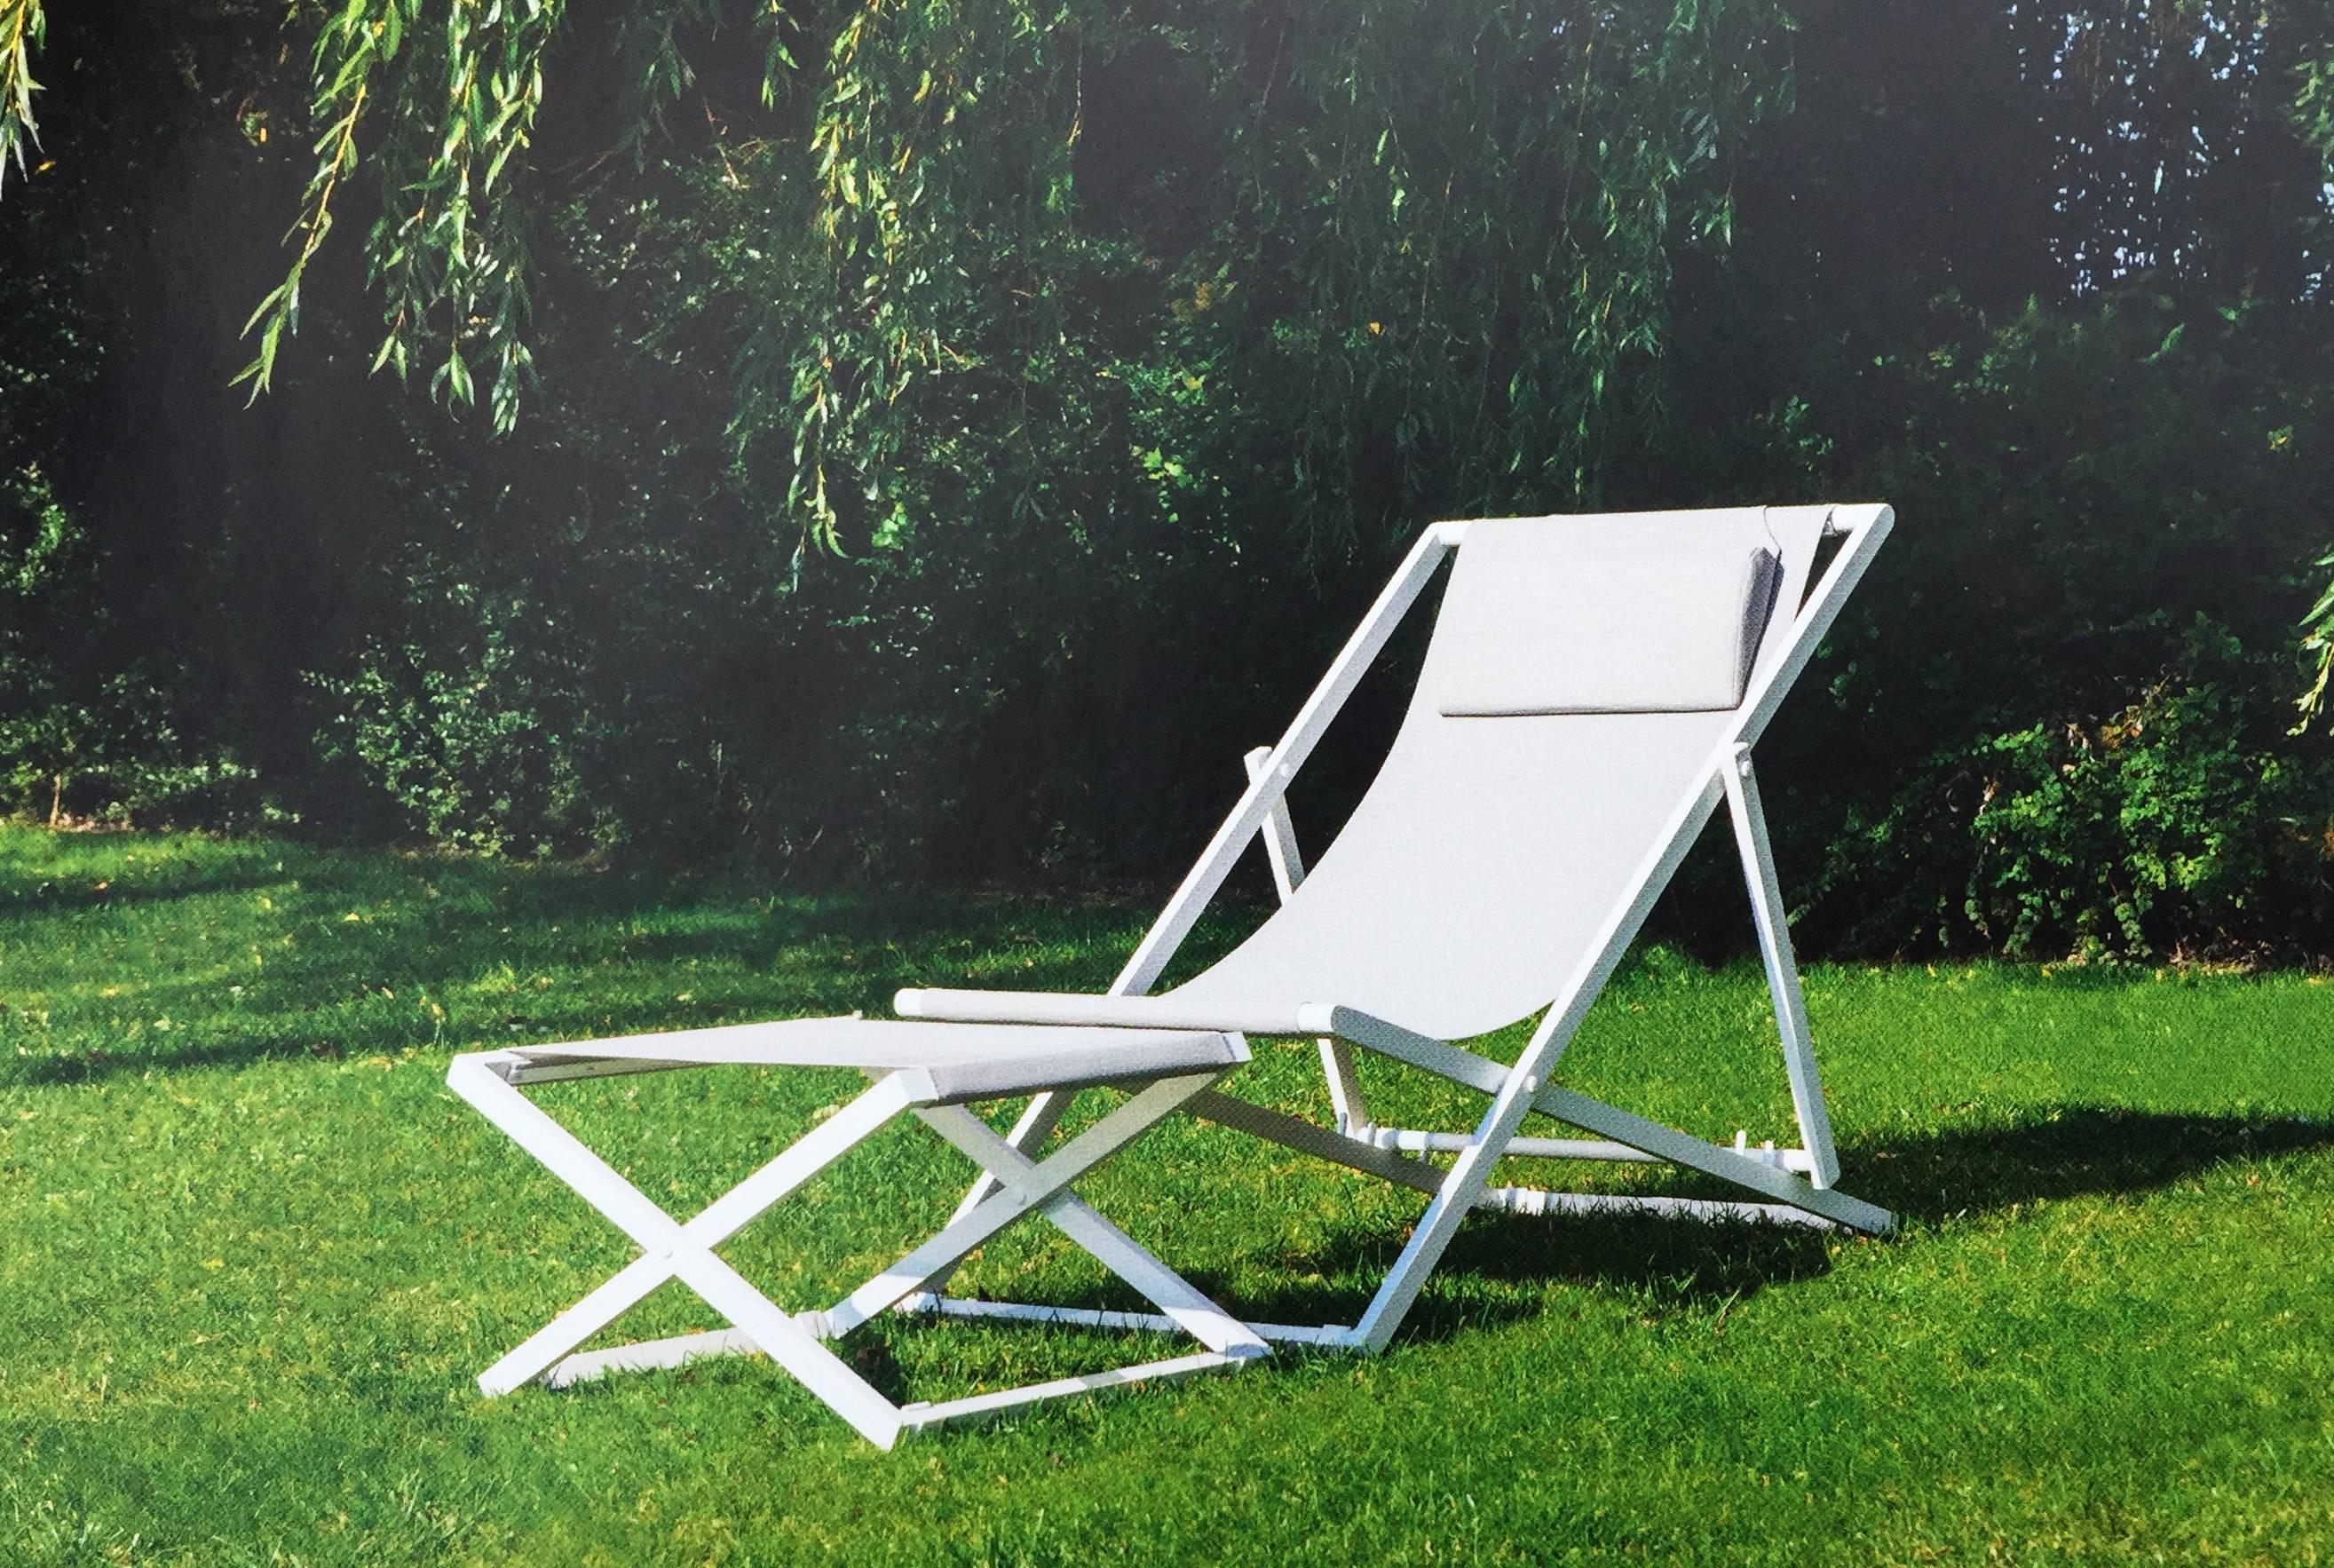 Lounger aluminium frame: Great for pools, gardens and even balconies. Powder coated aluminium is our material of choice for our lightest weight outdoor furniture. Nice detailed and fun! The base aluminium is coated with polyester micro particles in